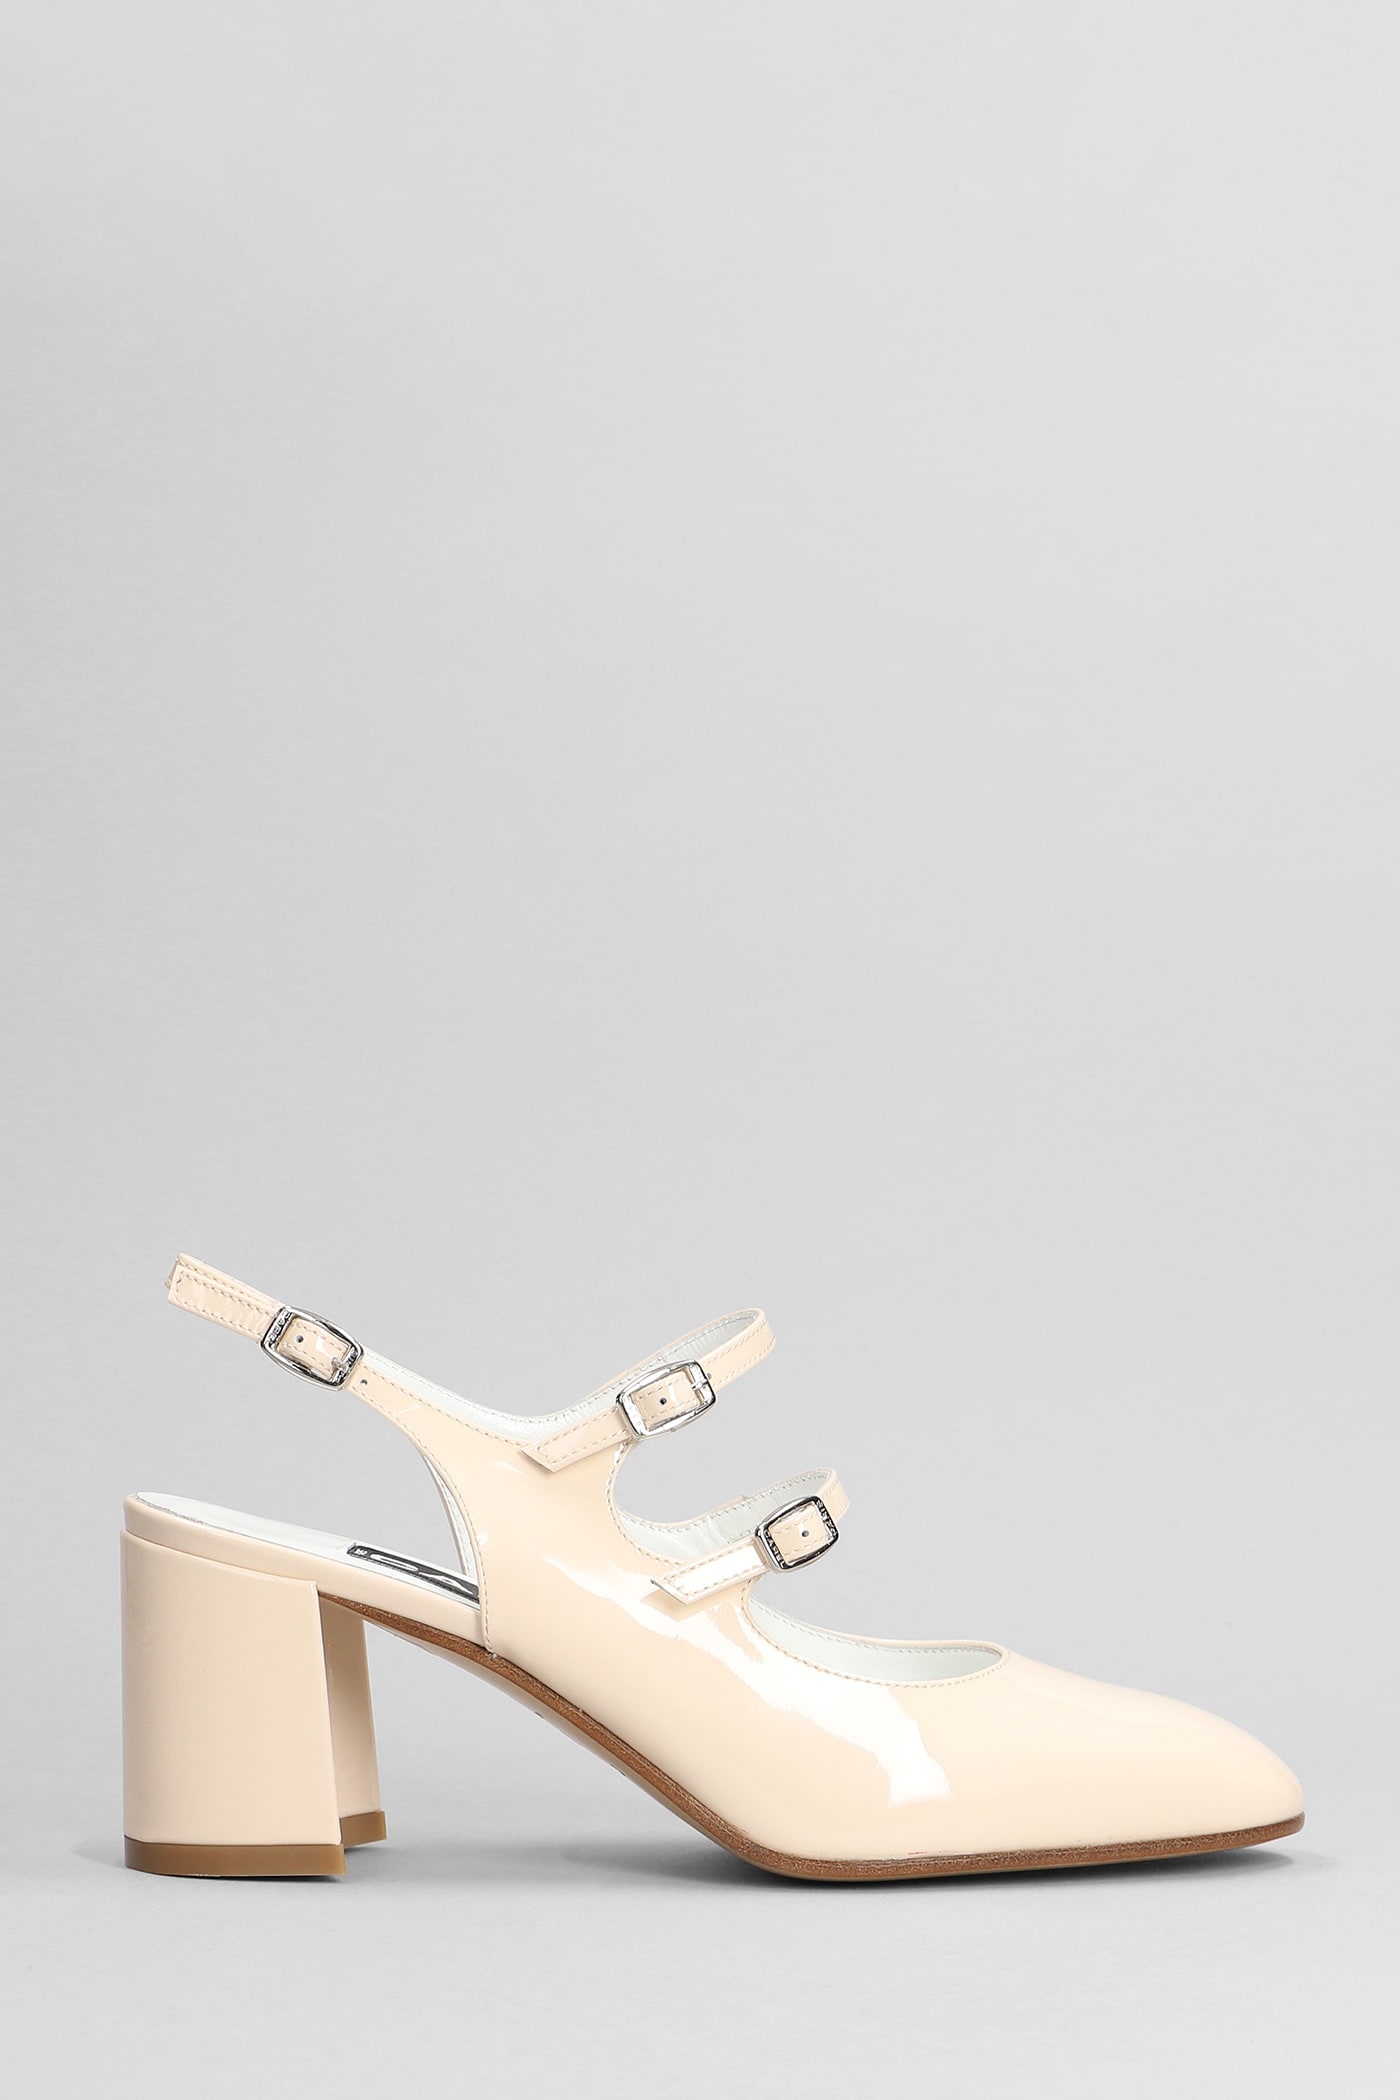 CAREL BANANA PUMPS IN BEIGE PATENT LEATHER